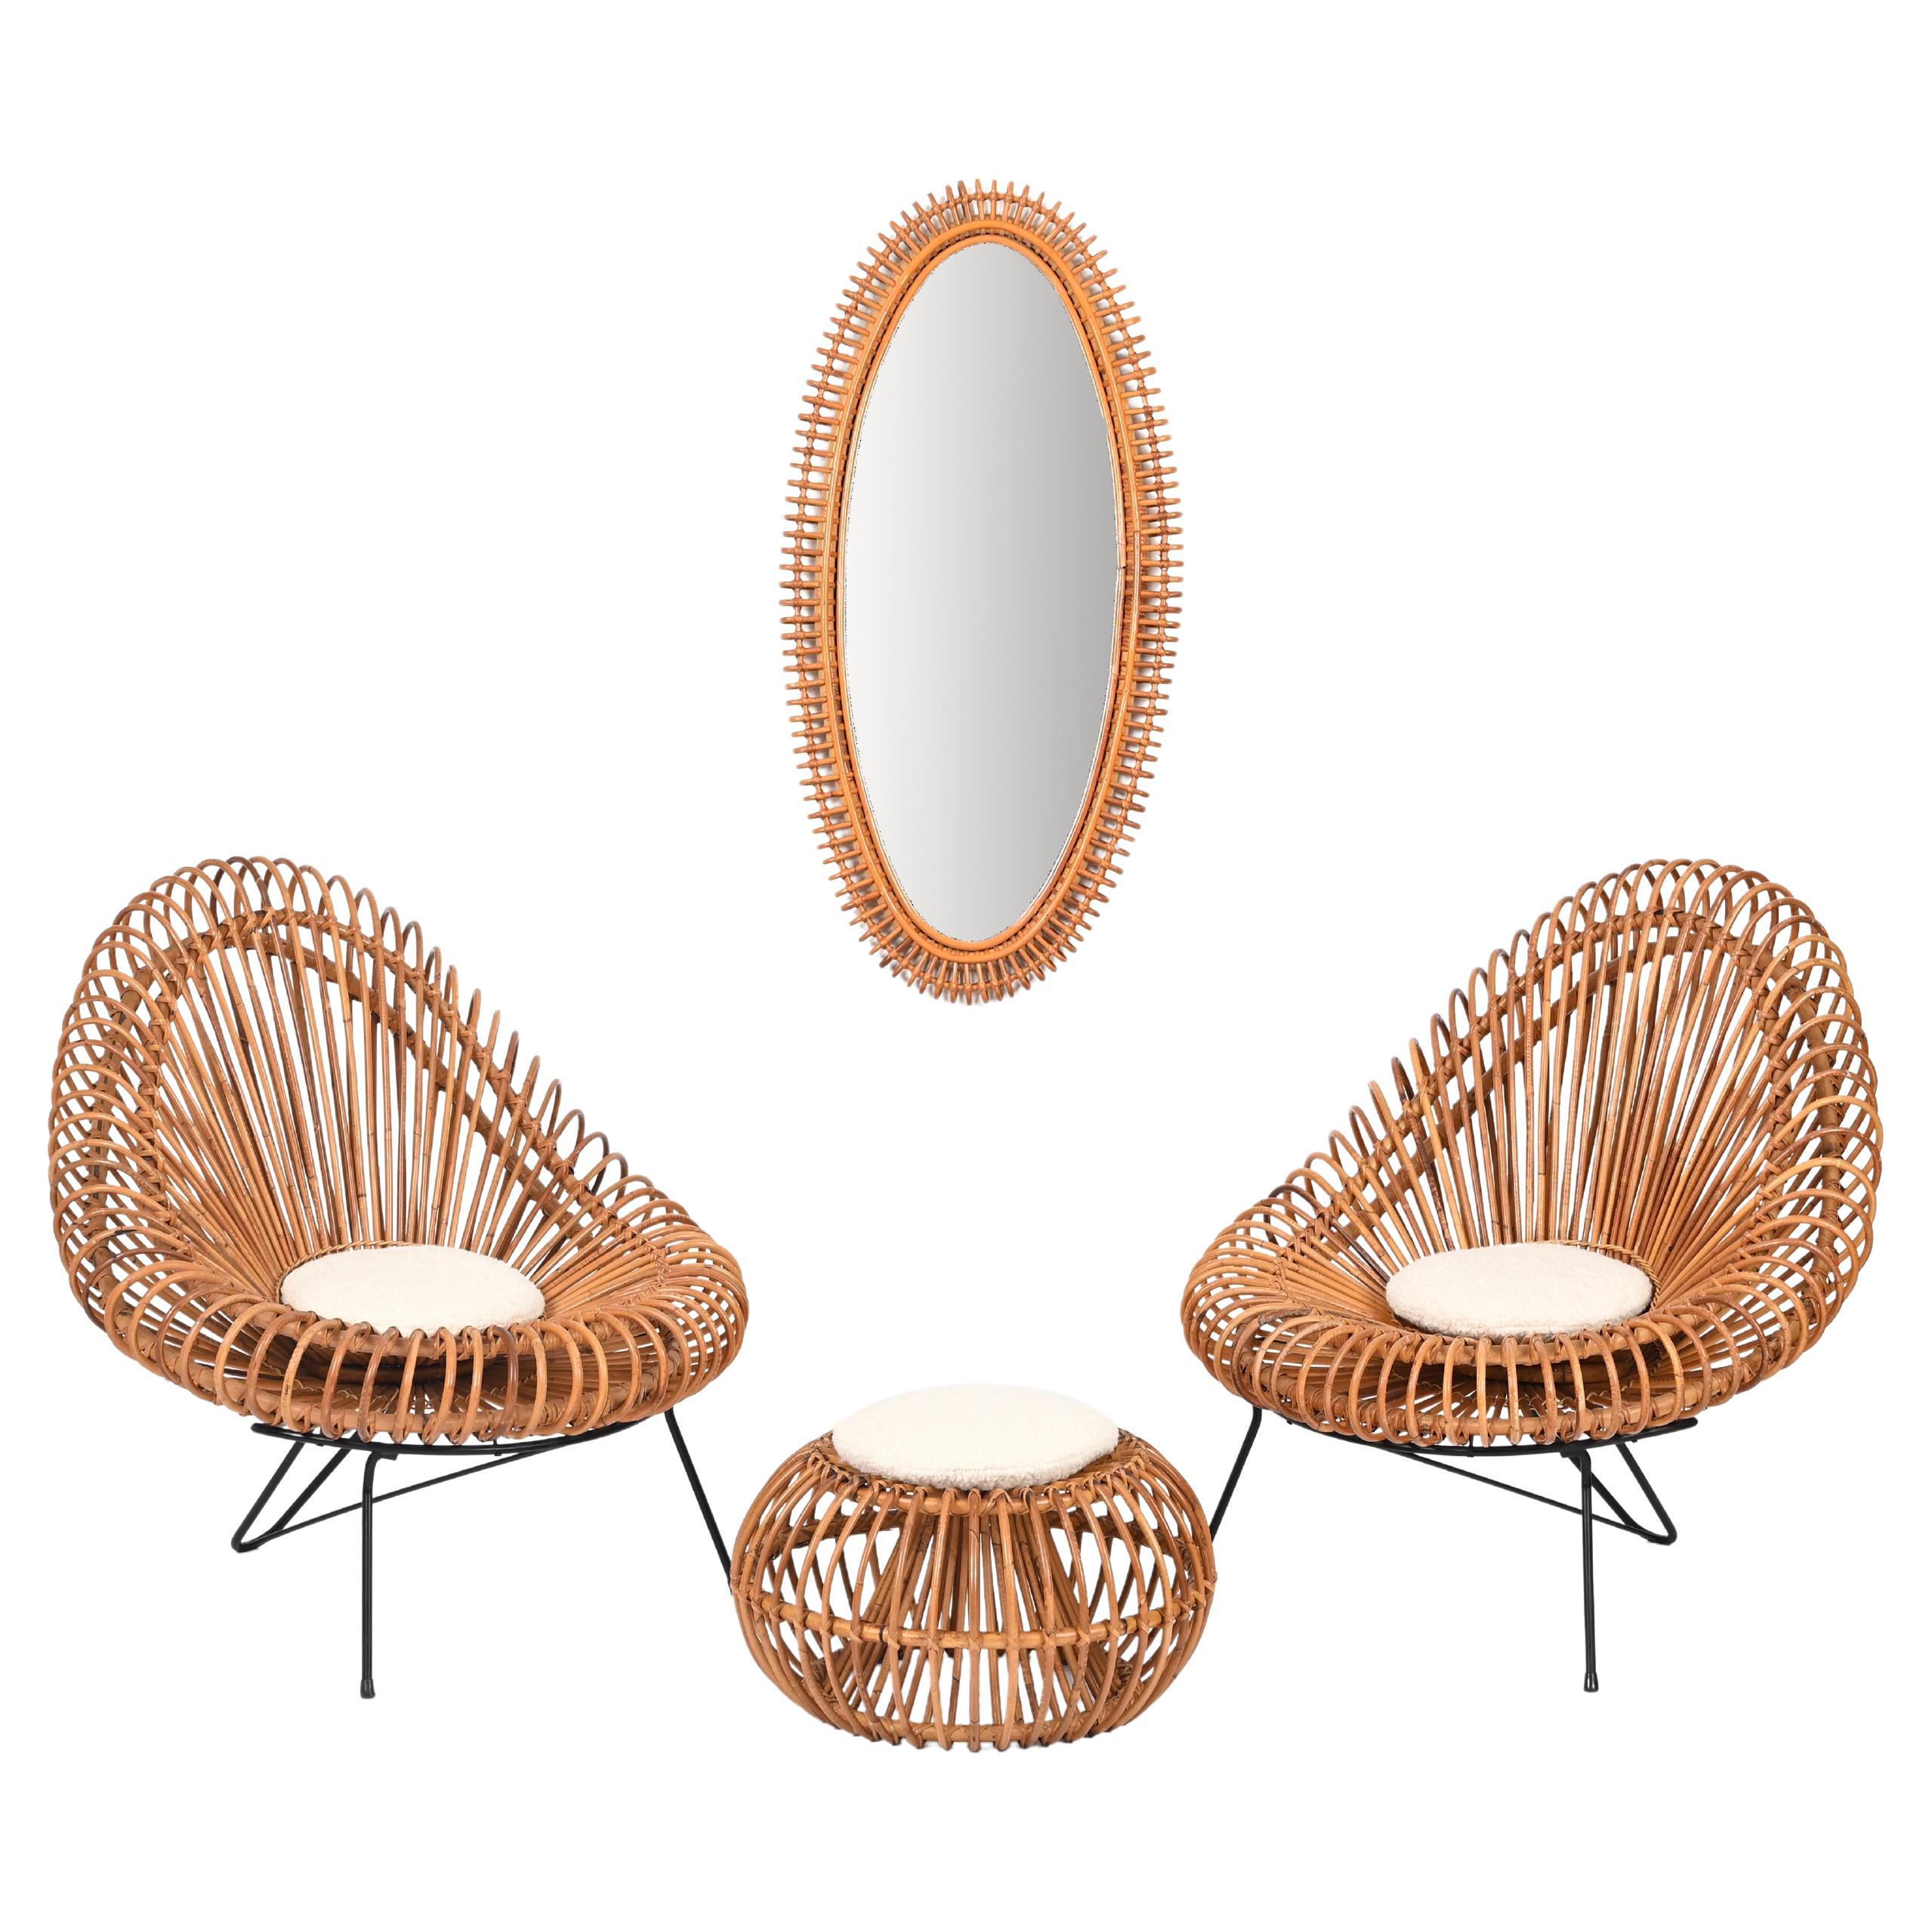 Living Room Rattan Set by Janine Abraham & Dirk Jan Rol - Chairs, Pouf, Mirror 